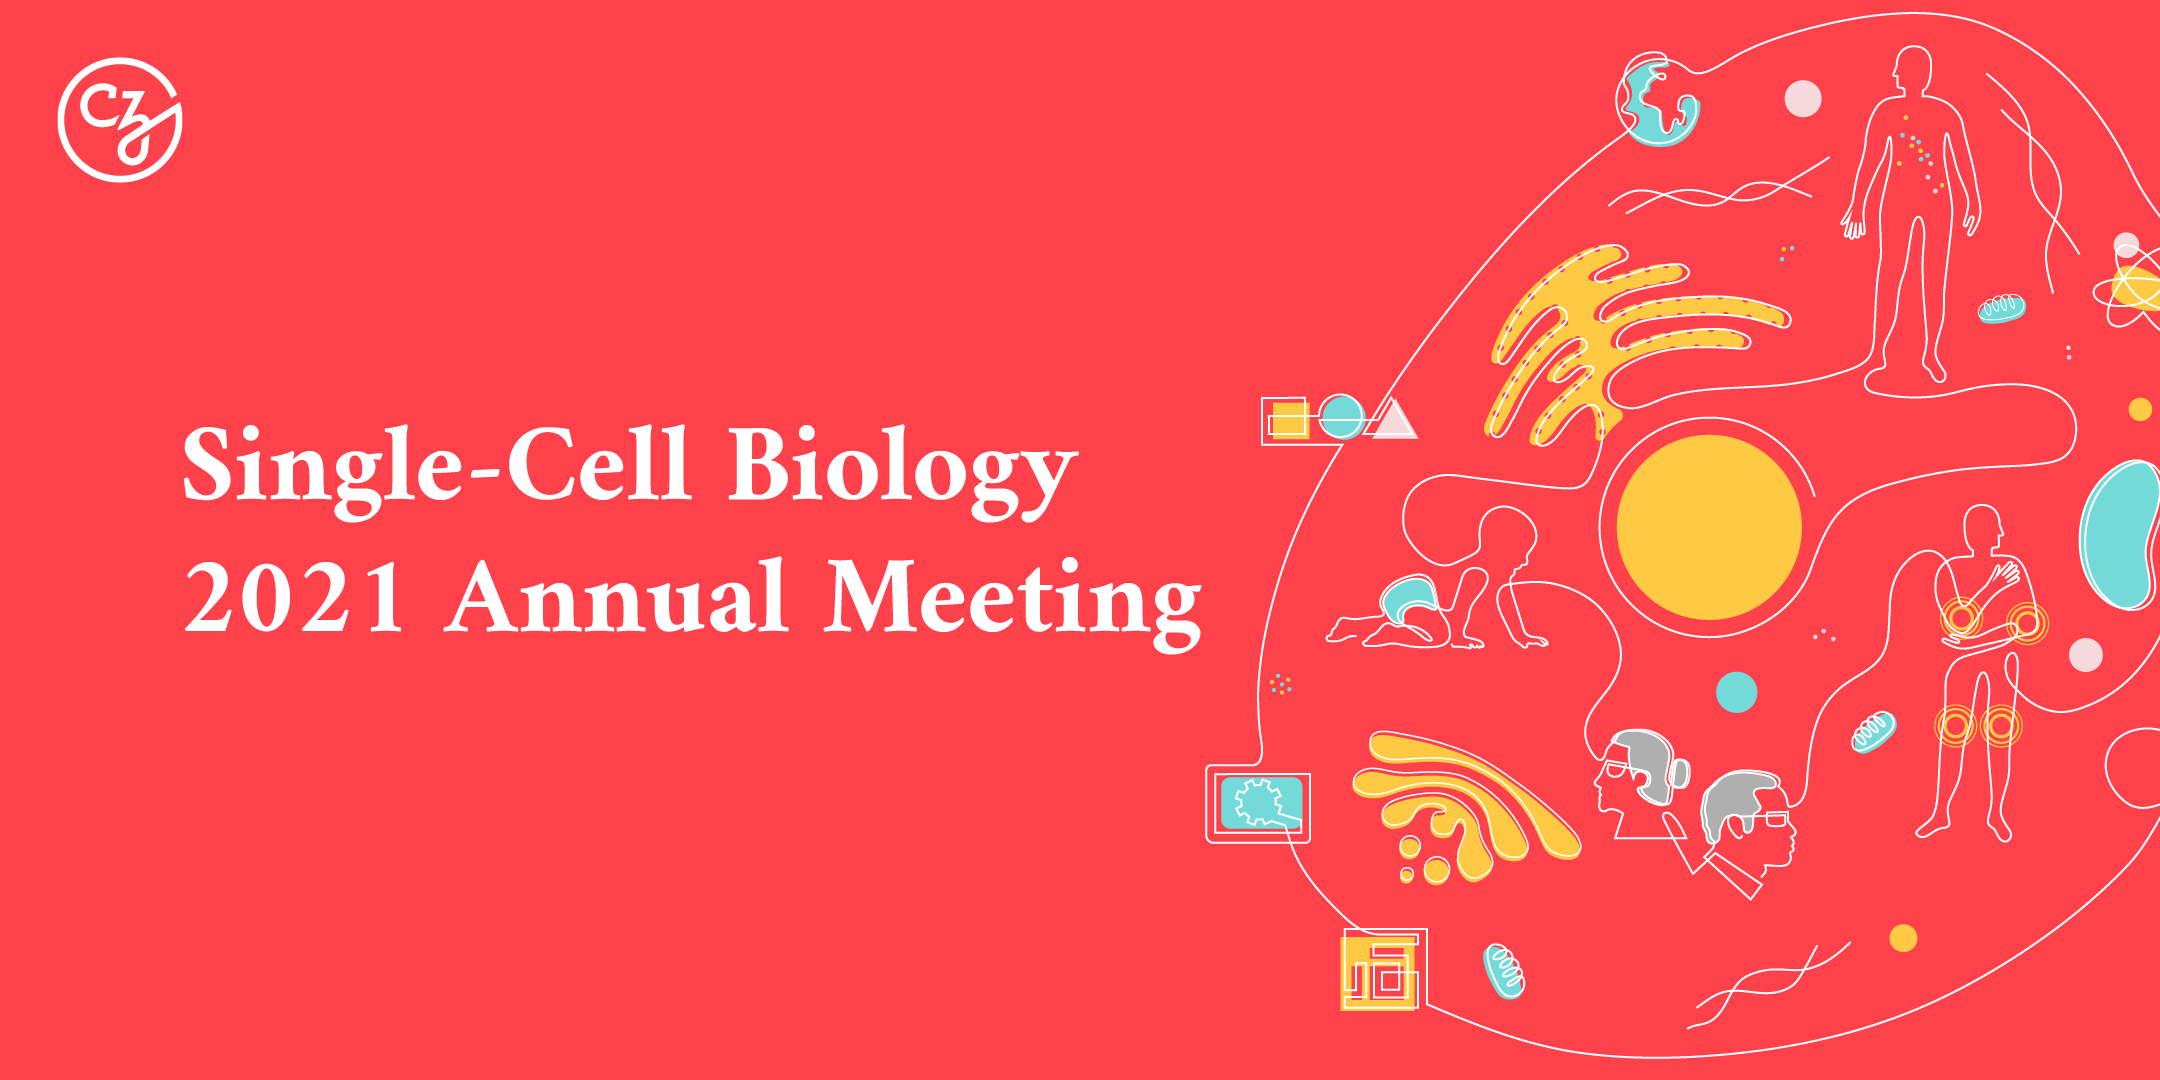 Text overlays a bright red background with graphical elements representing the inside of a cell and reads, “Single-Cell Biology 2021 Annual Meeting”